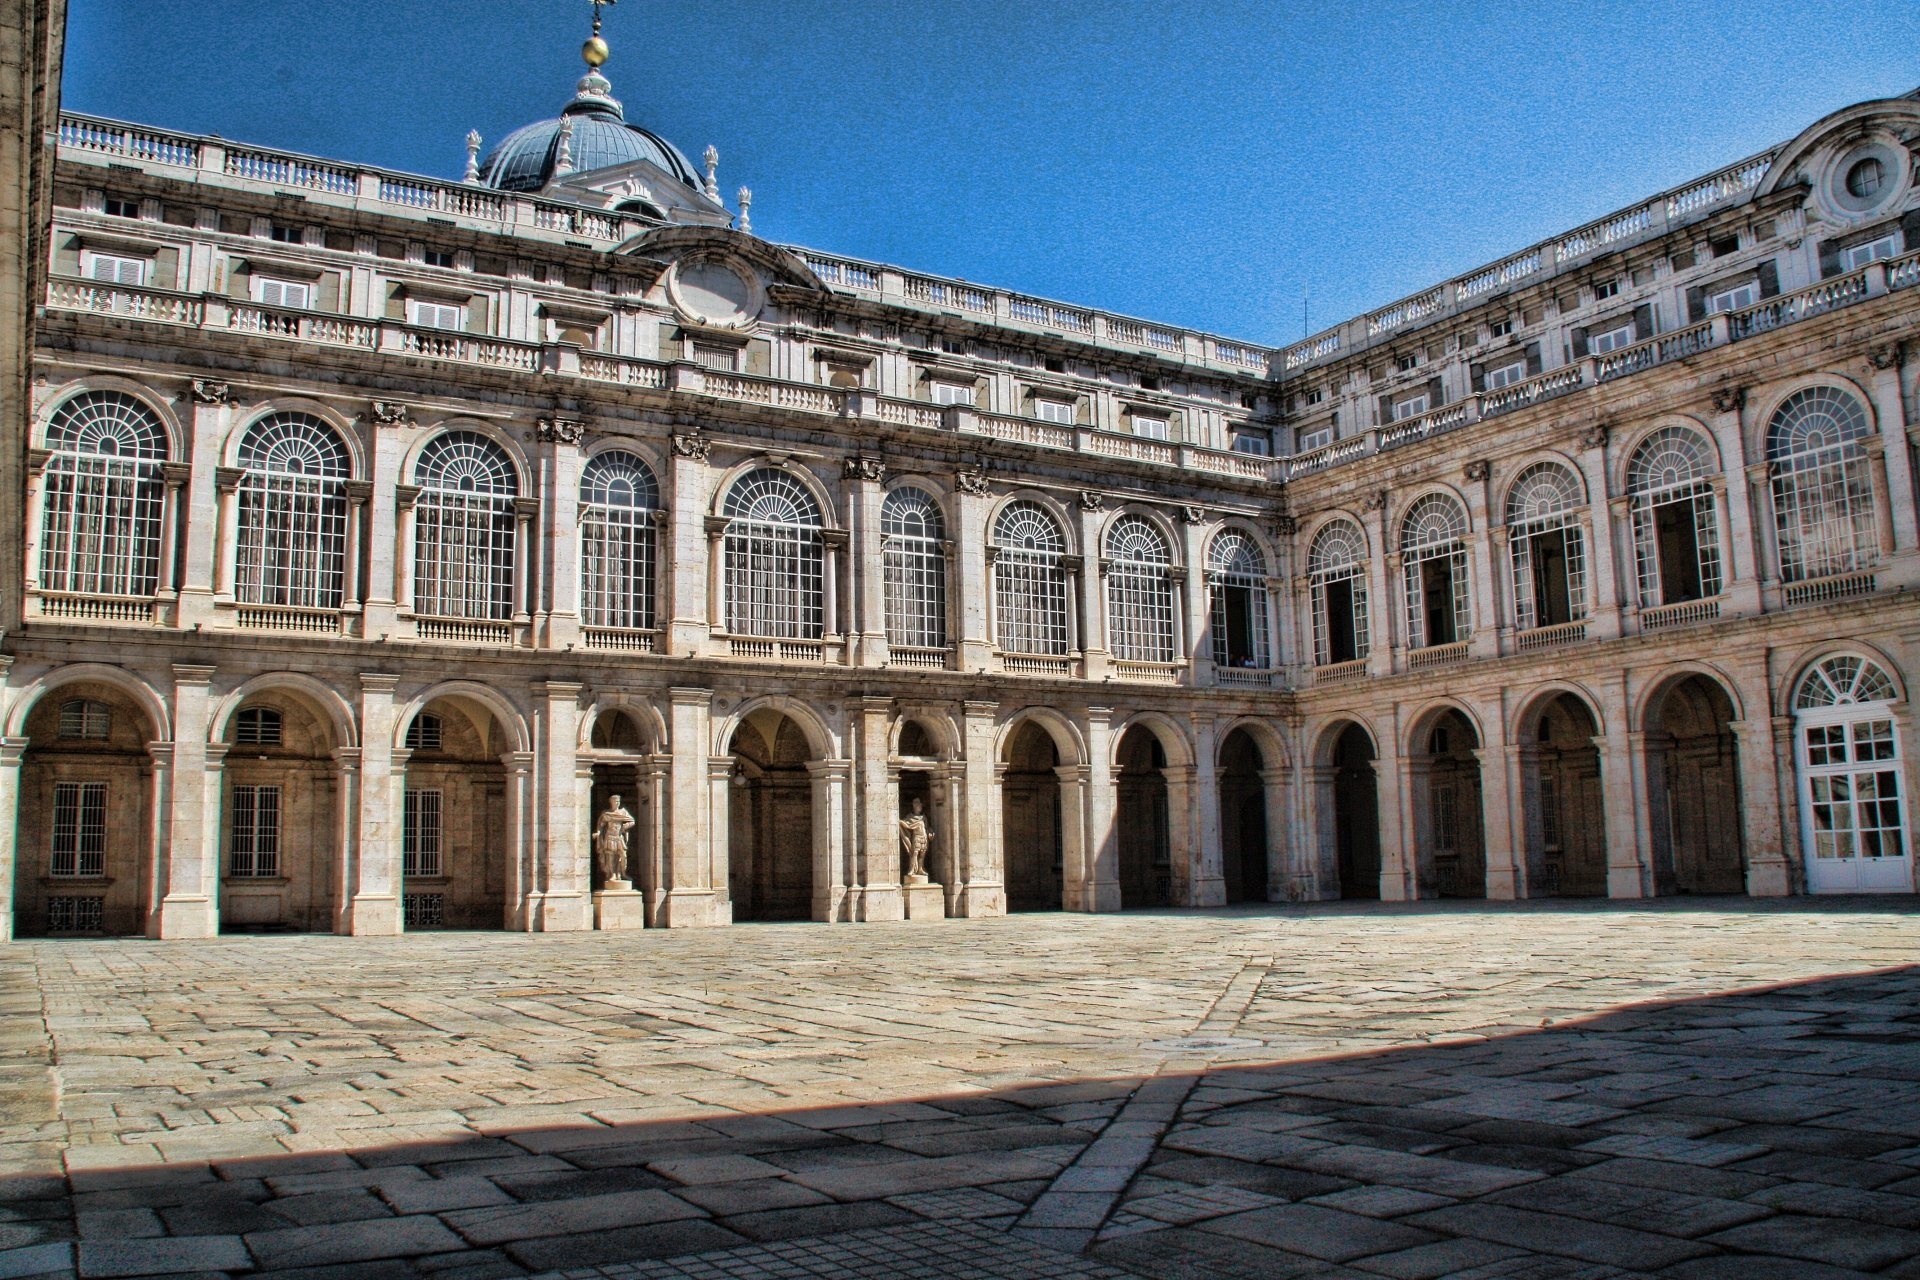 Royal Palace of Madrid, HD wallpapers, Background images, Spanish architecture, 1920x1280 HD Desktop